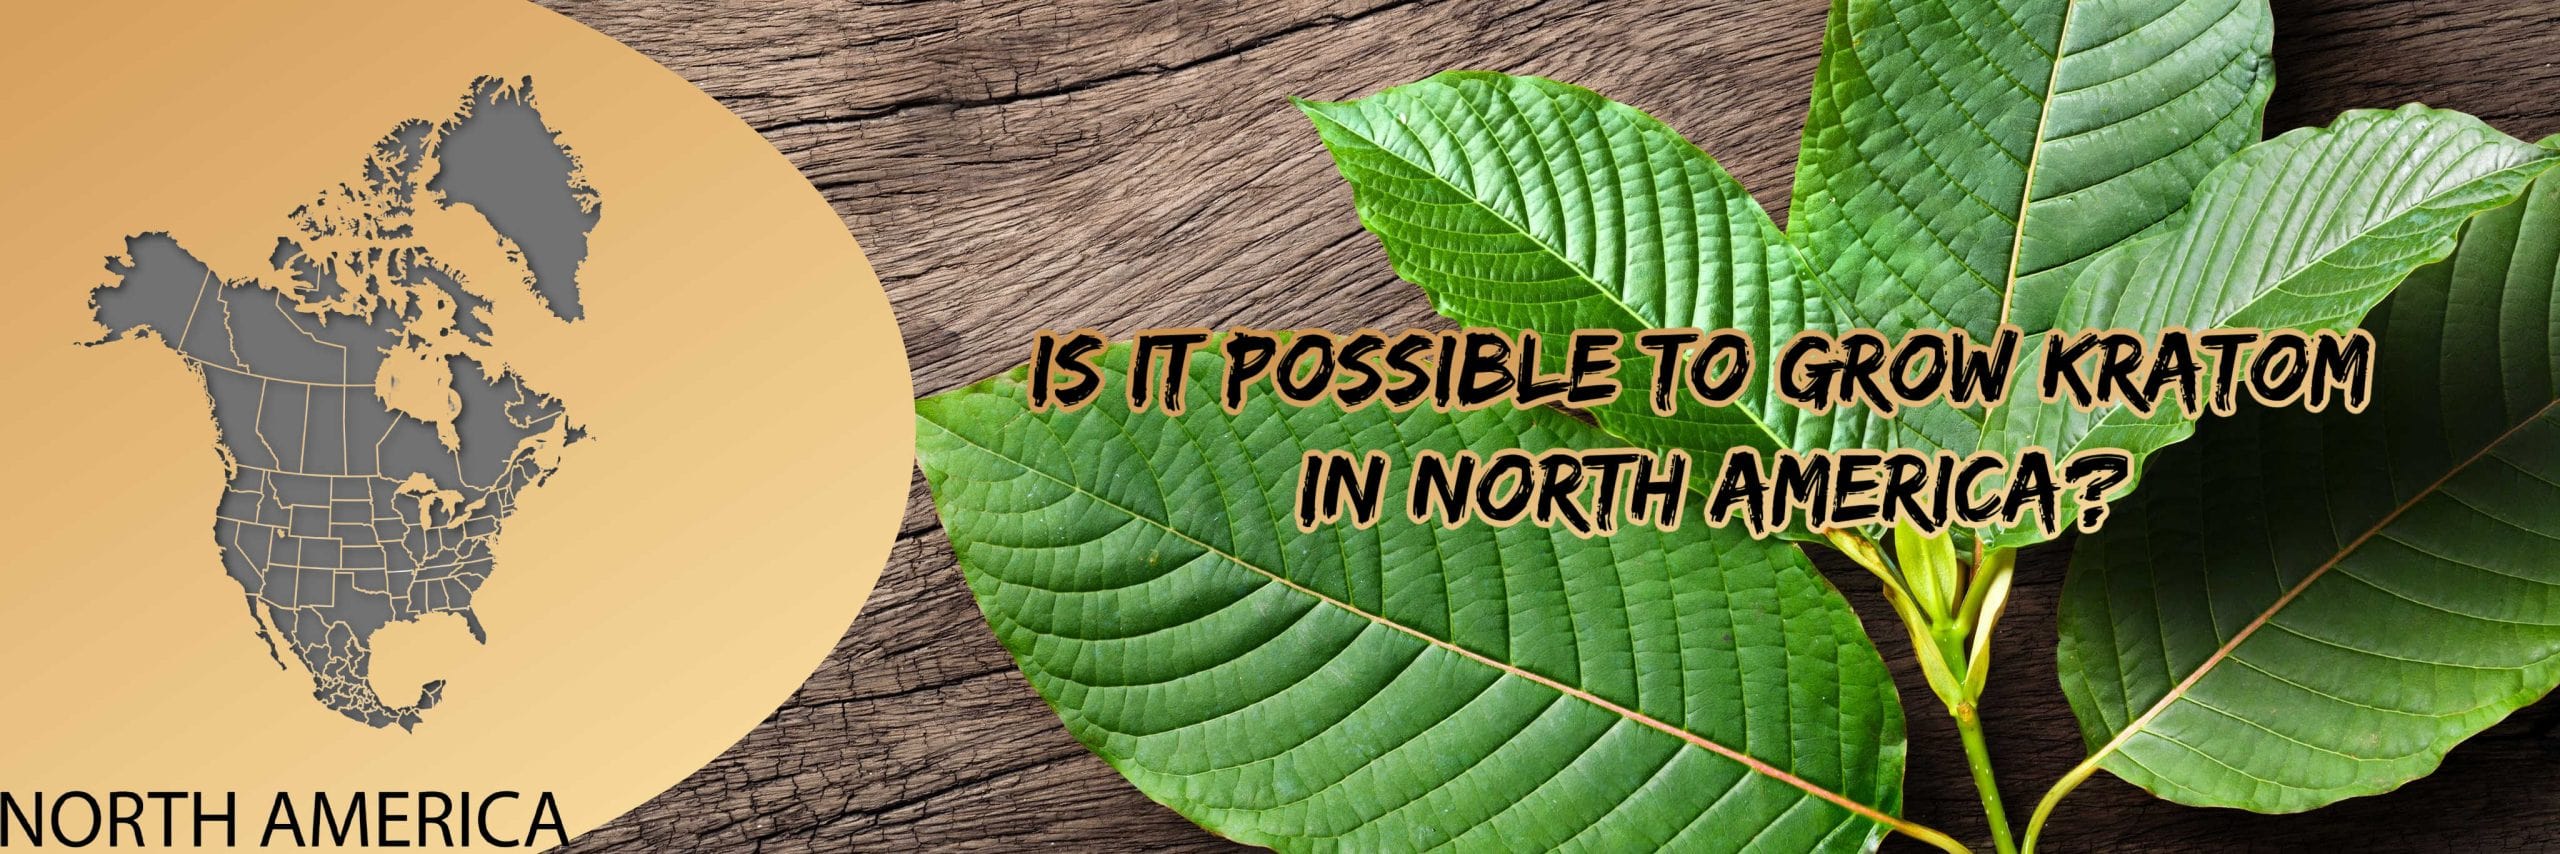 image of is it possible to grow kratom in north america